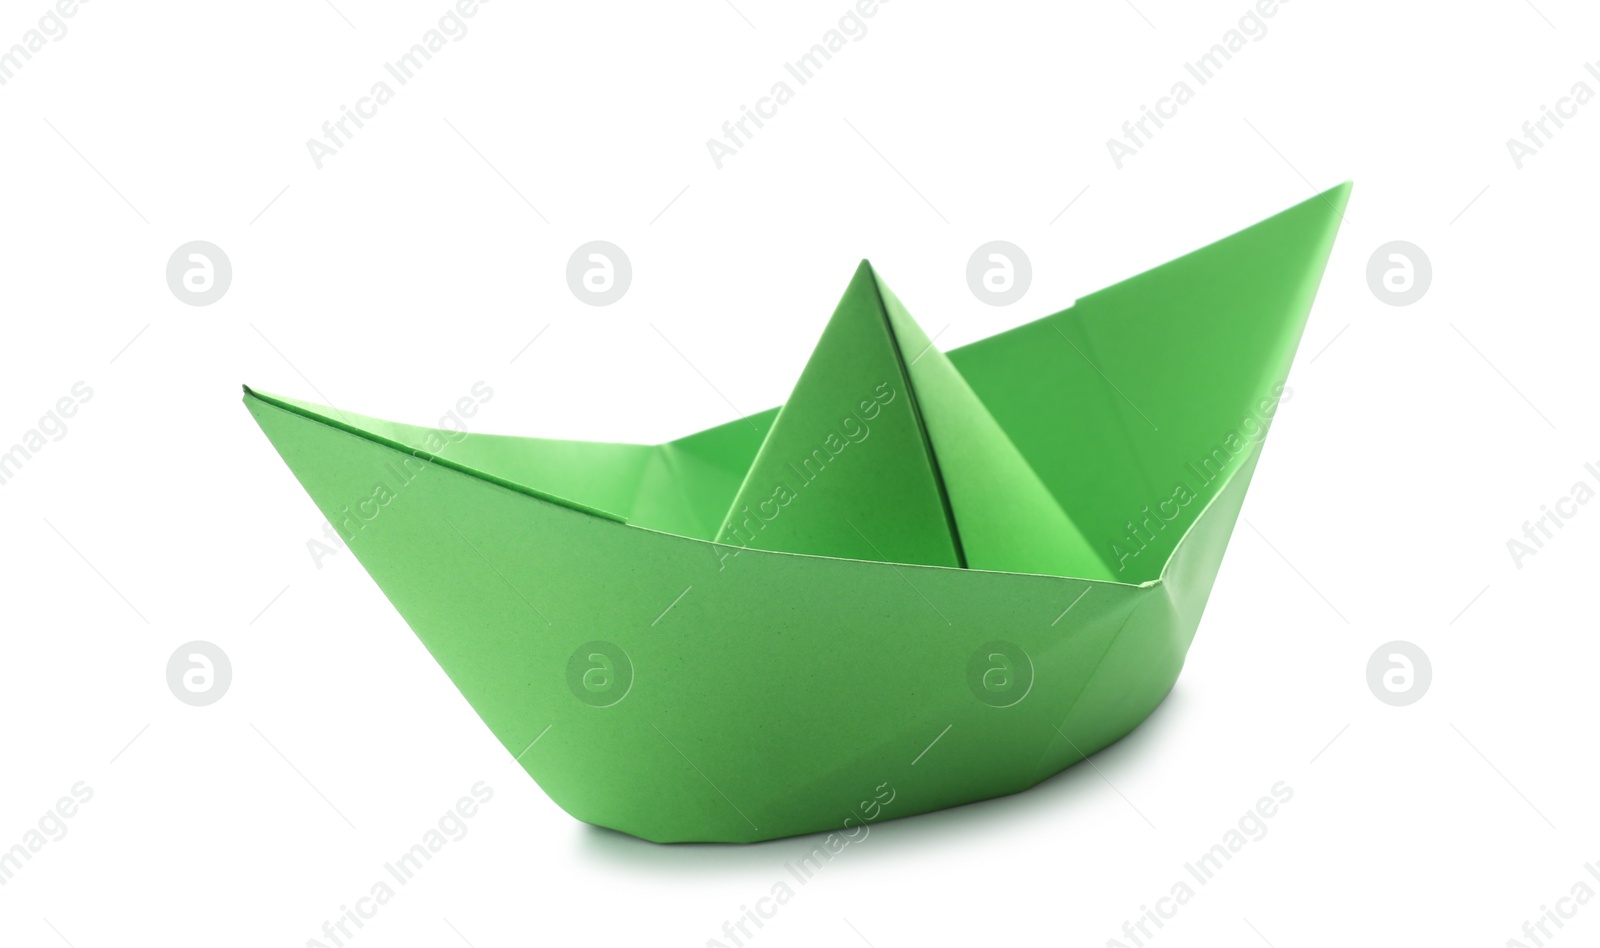 Photo of Handmade green paper boat isolated on white. Origami art